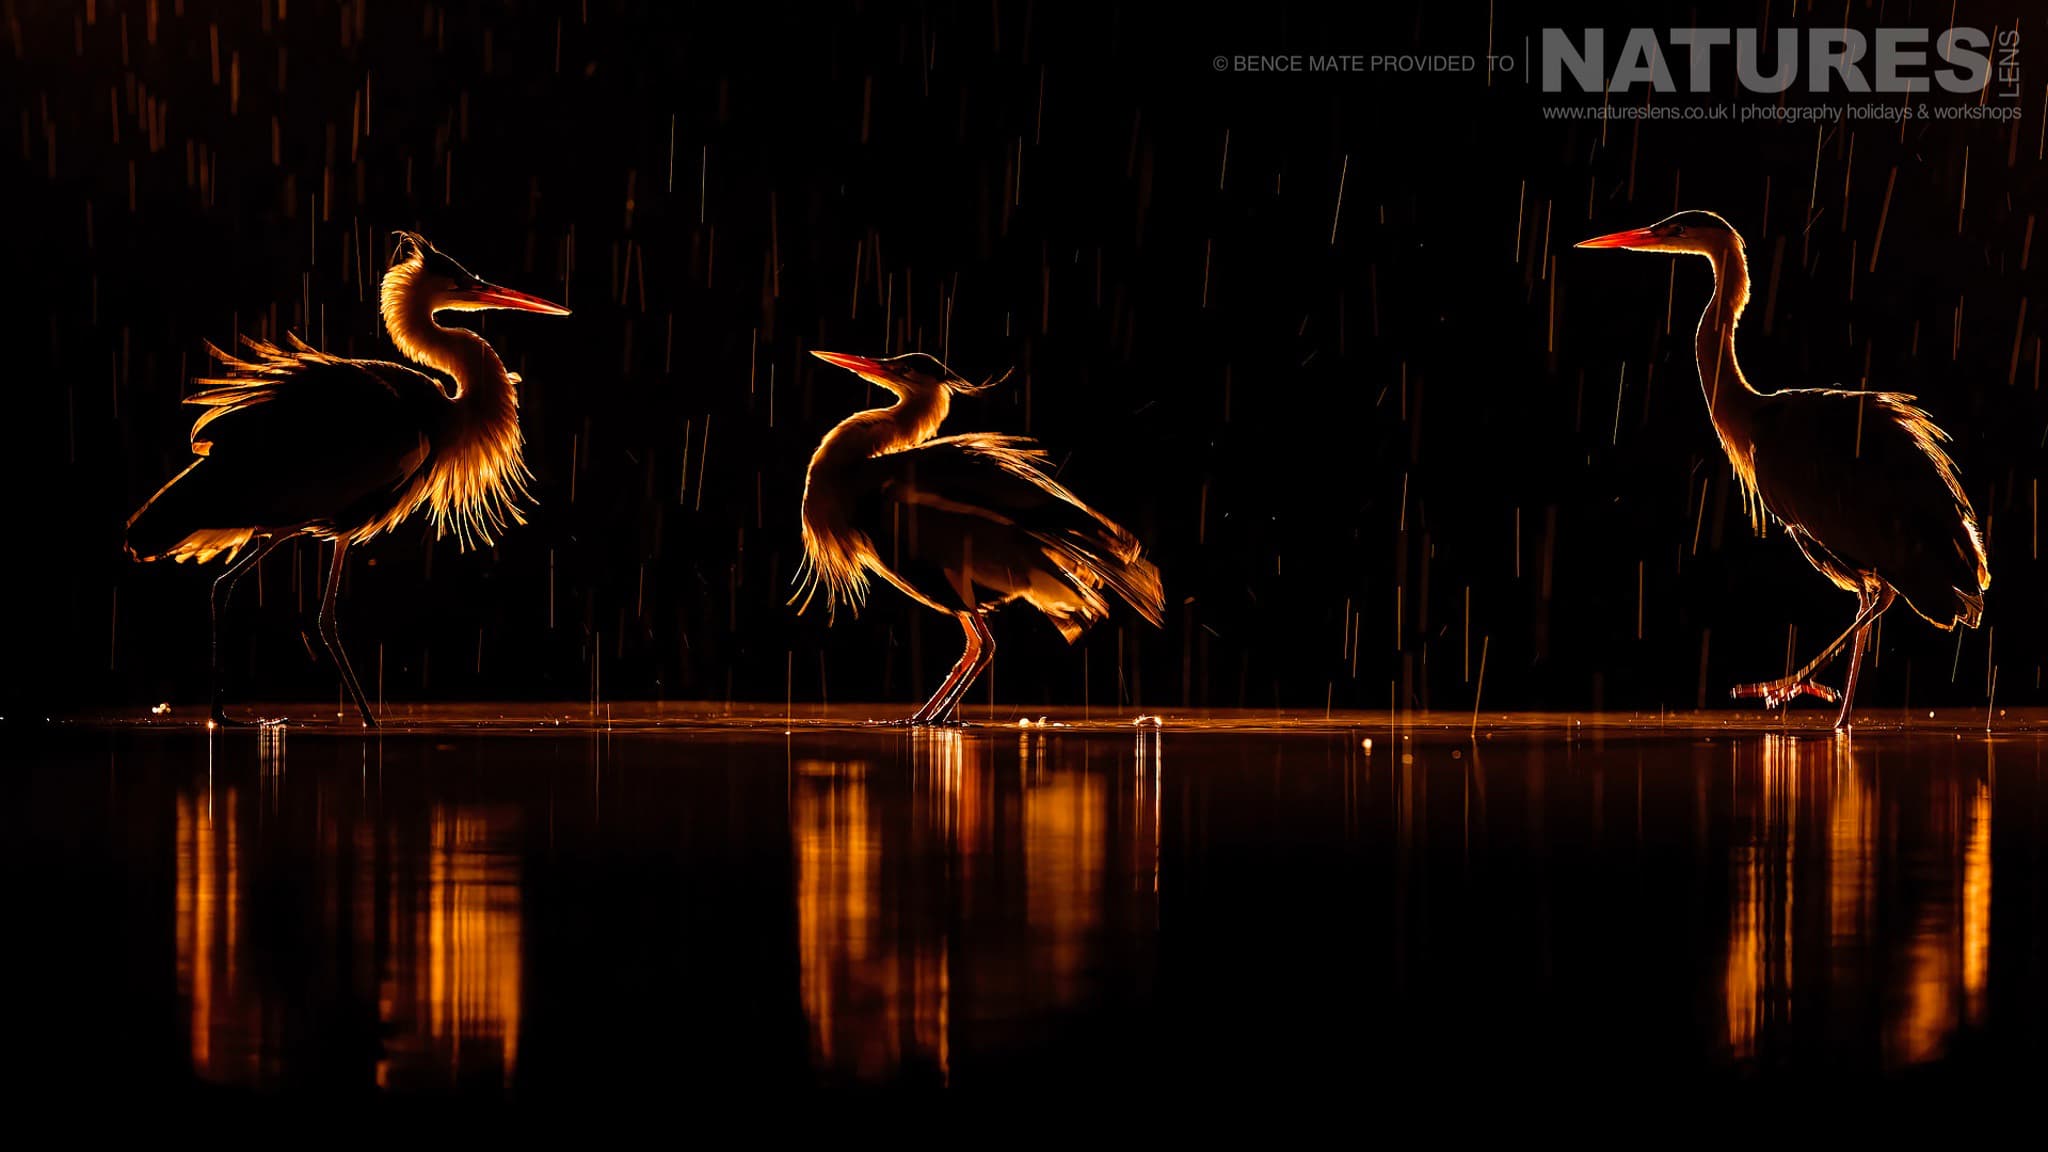 Backlit wading birds at Bence Máté's Photography Hides during the Hungarian Winter